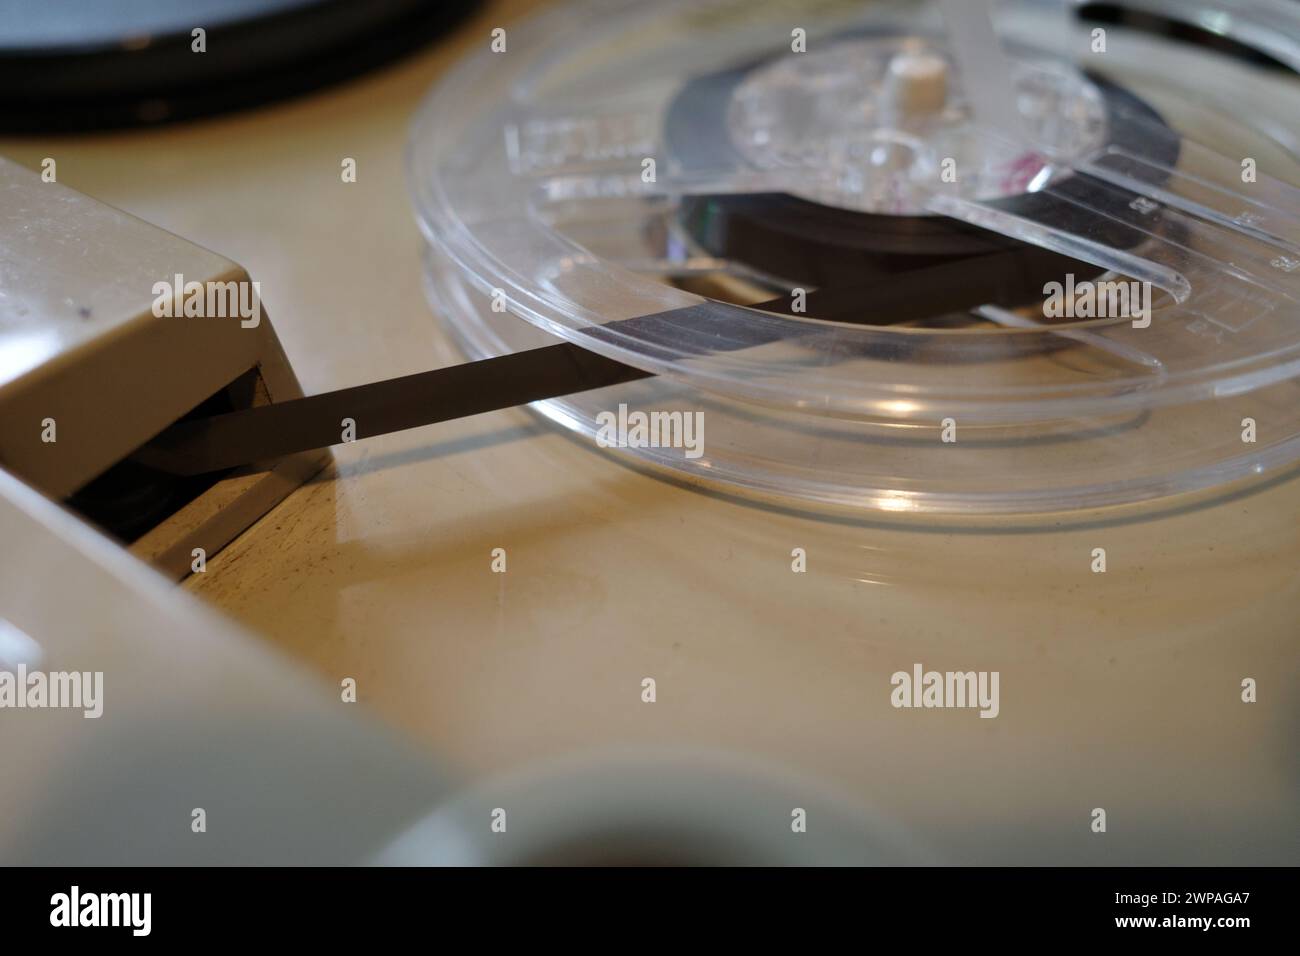 Teac A-3440 Reel-to-reel front view Stock Photo - Alamy